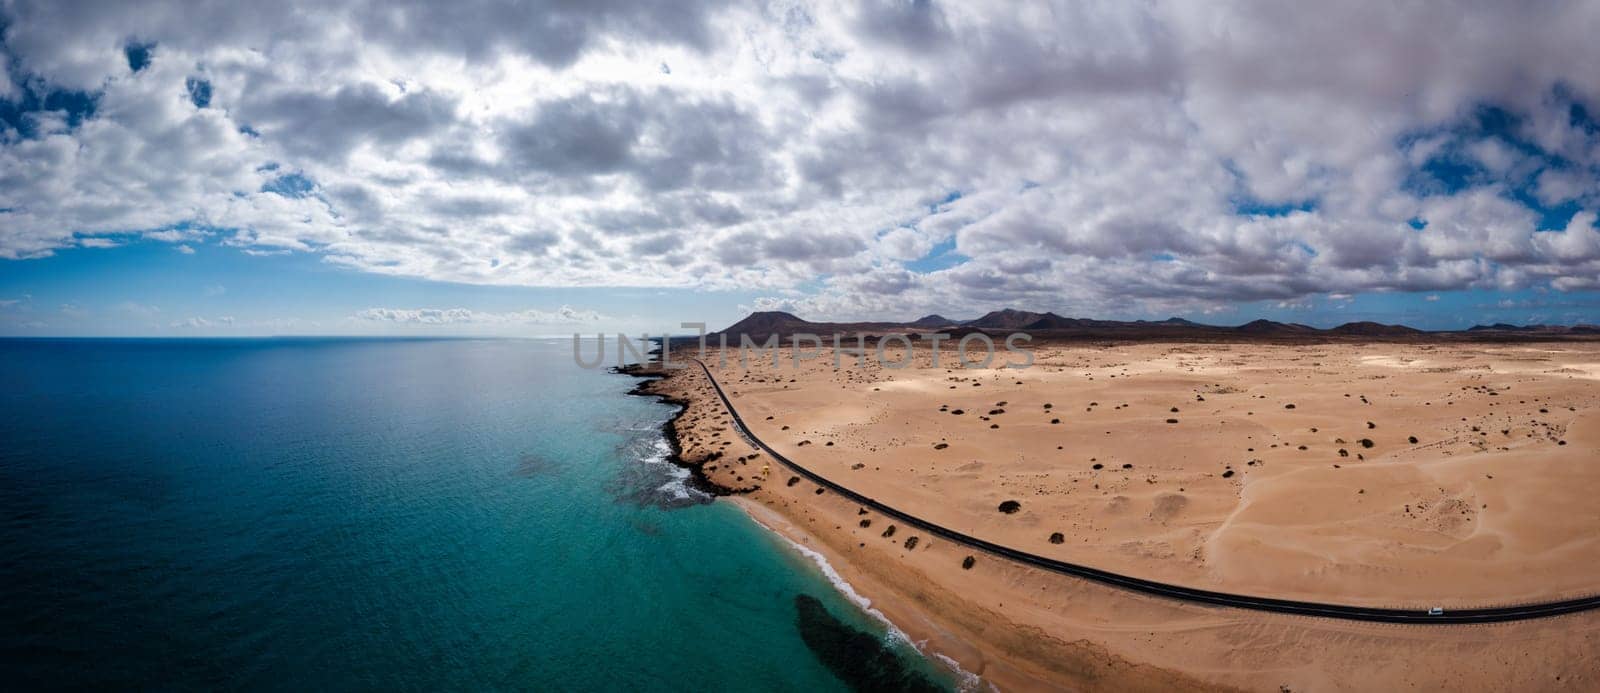 Panoramic high angle aerial drone view of Corralejo National Park (Parque Natural de Corralejo) with sand dunes located in the northeast corner of the island of Fuerteventura, Canary Islands, Spain. by DaLiu